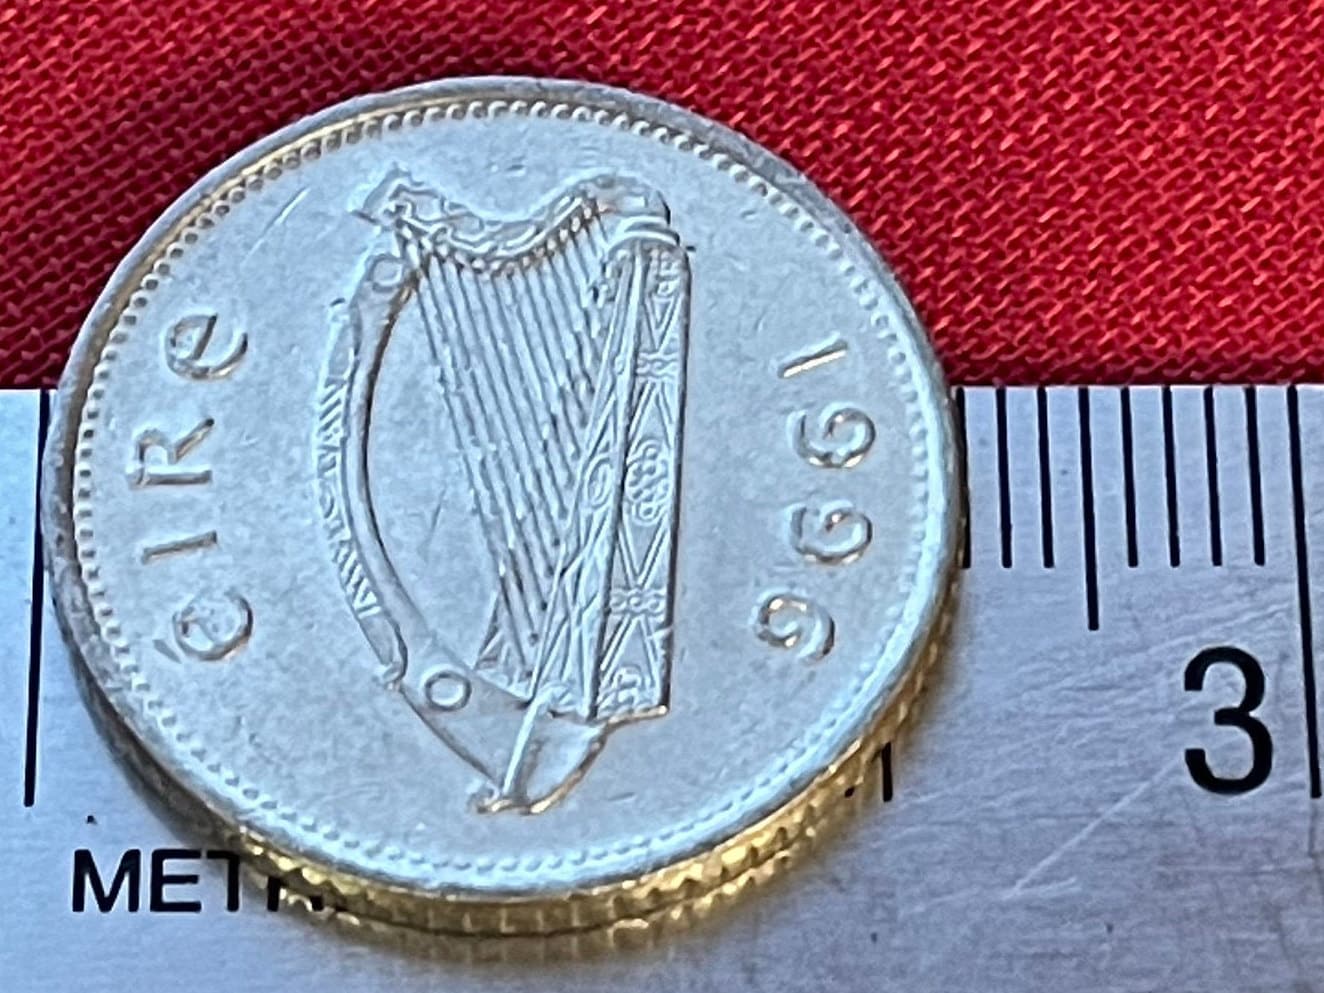 Atlantic Salmon & Harp 10 Pence Ireland Authentic Coin Money for Jewelry and Craft Making